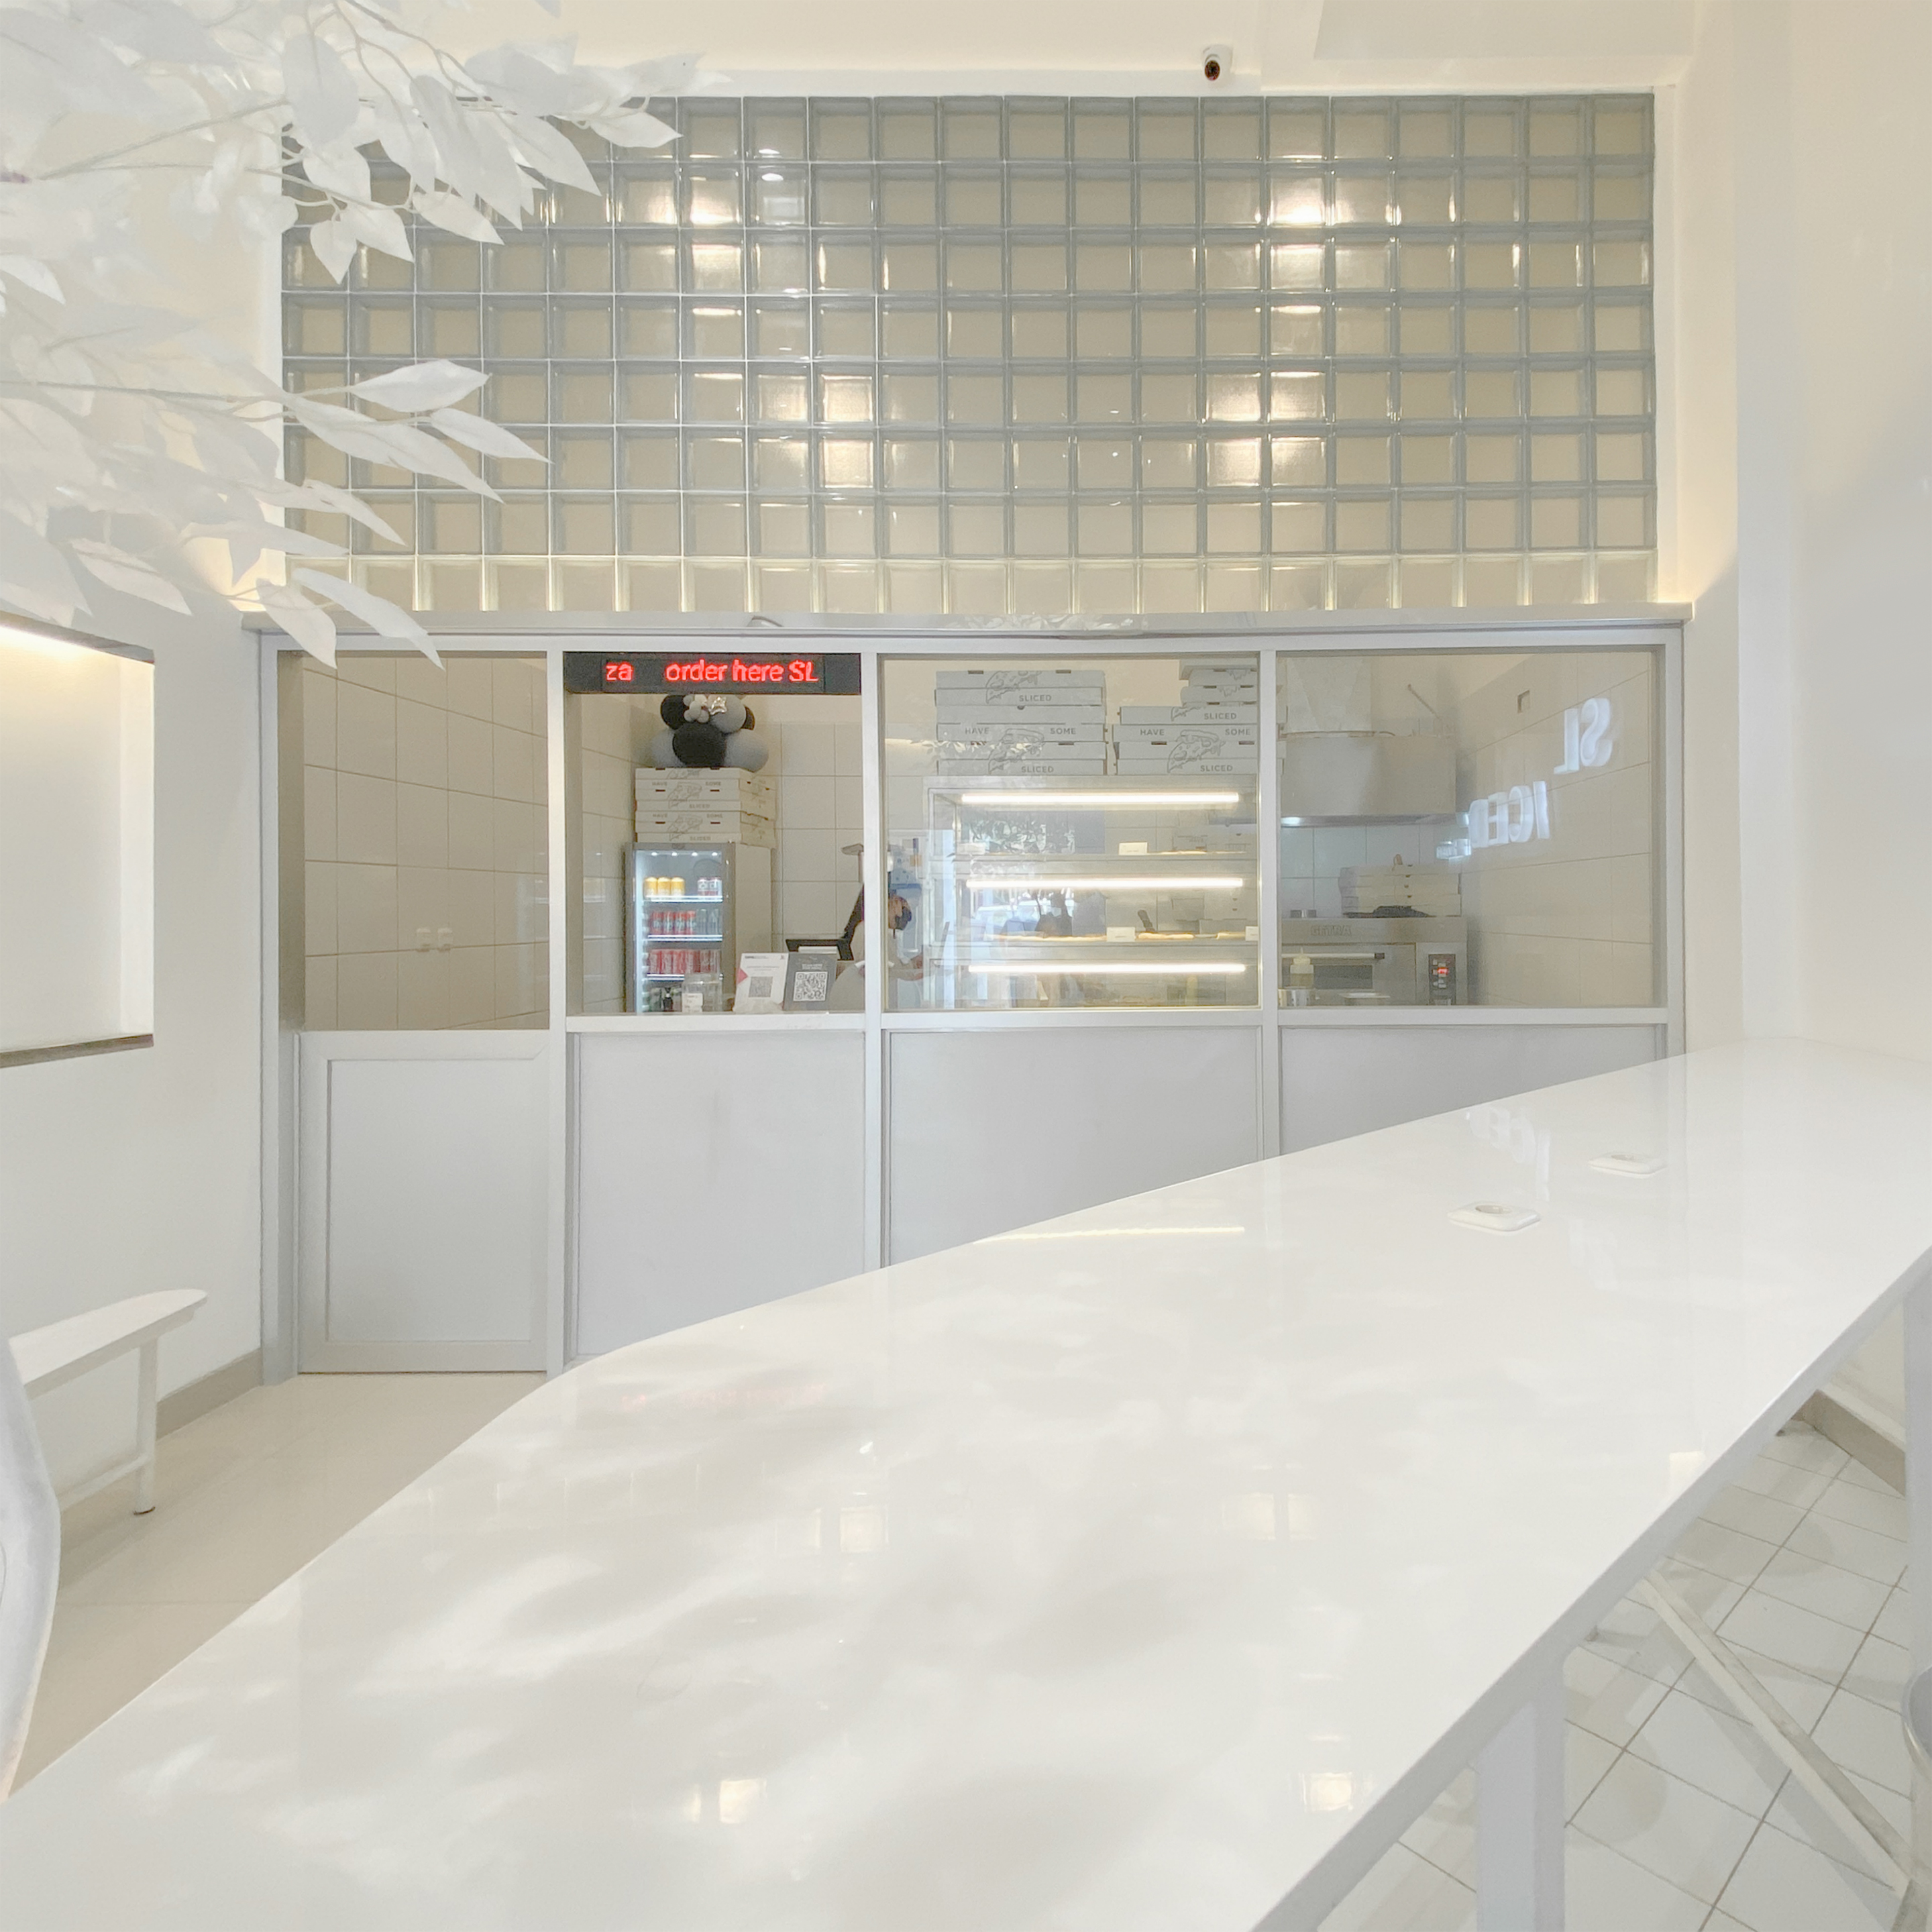 (The kitchen area is designed with translucent glass and glass blocks to harmonize the concept of the space)